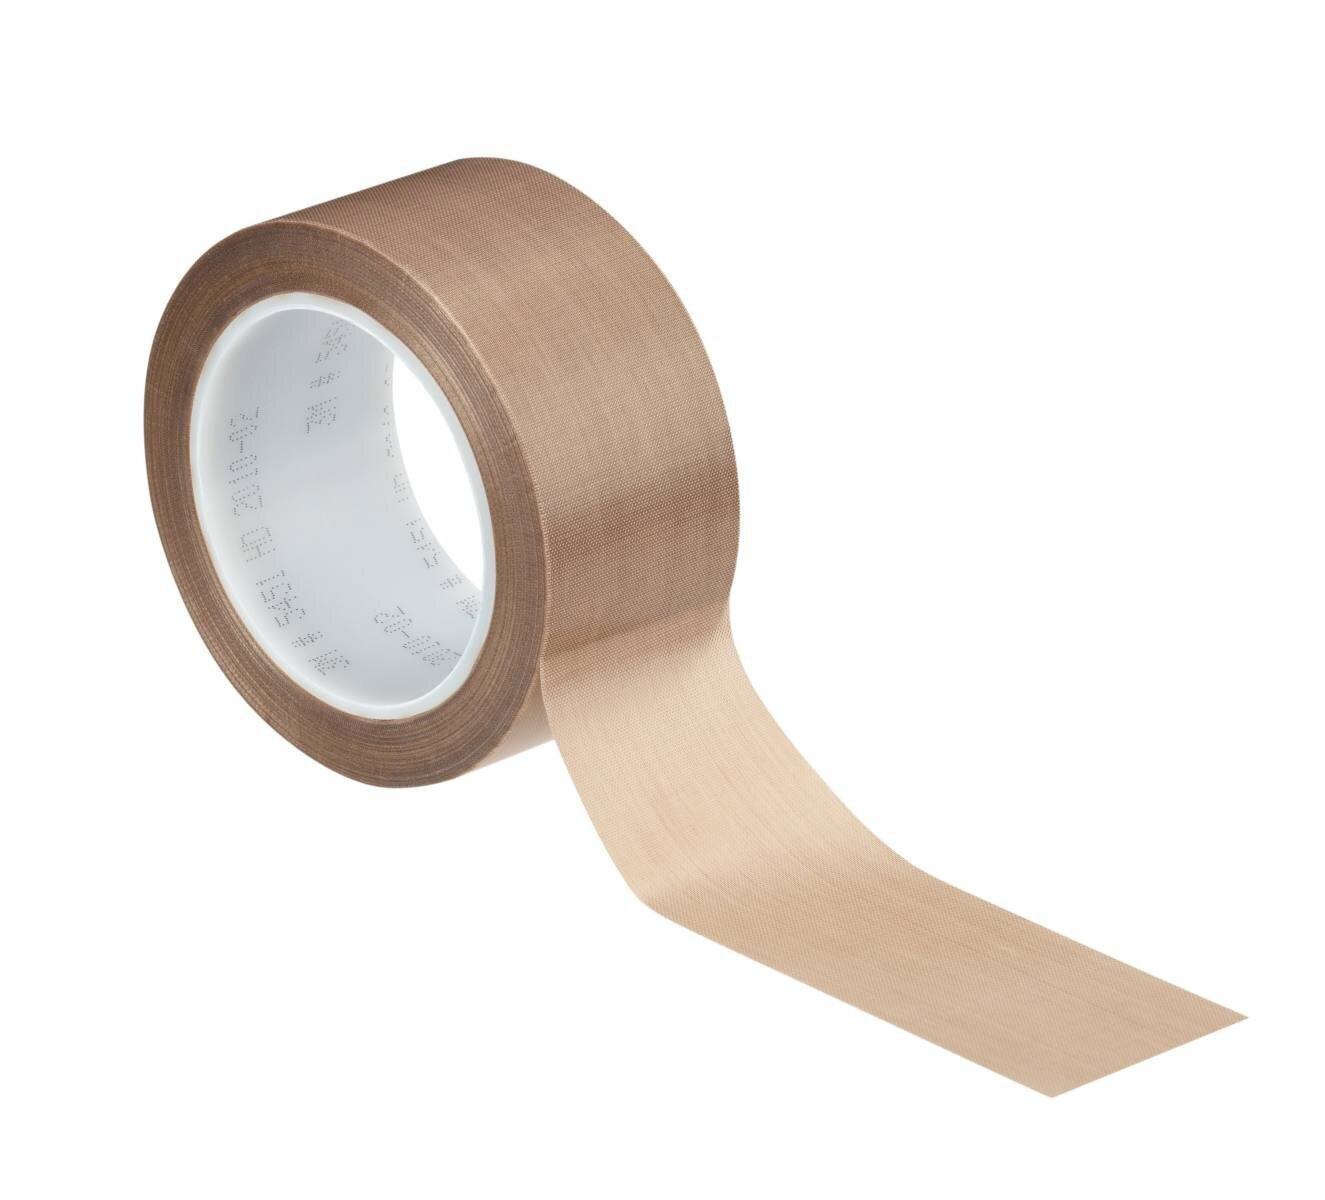 3M 5451 PTFE glass adhesive tape 25mmx33m, 0.14mm, silicone